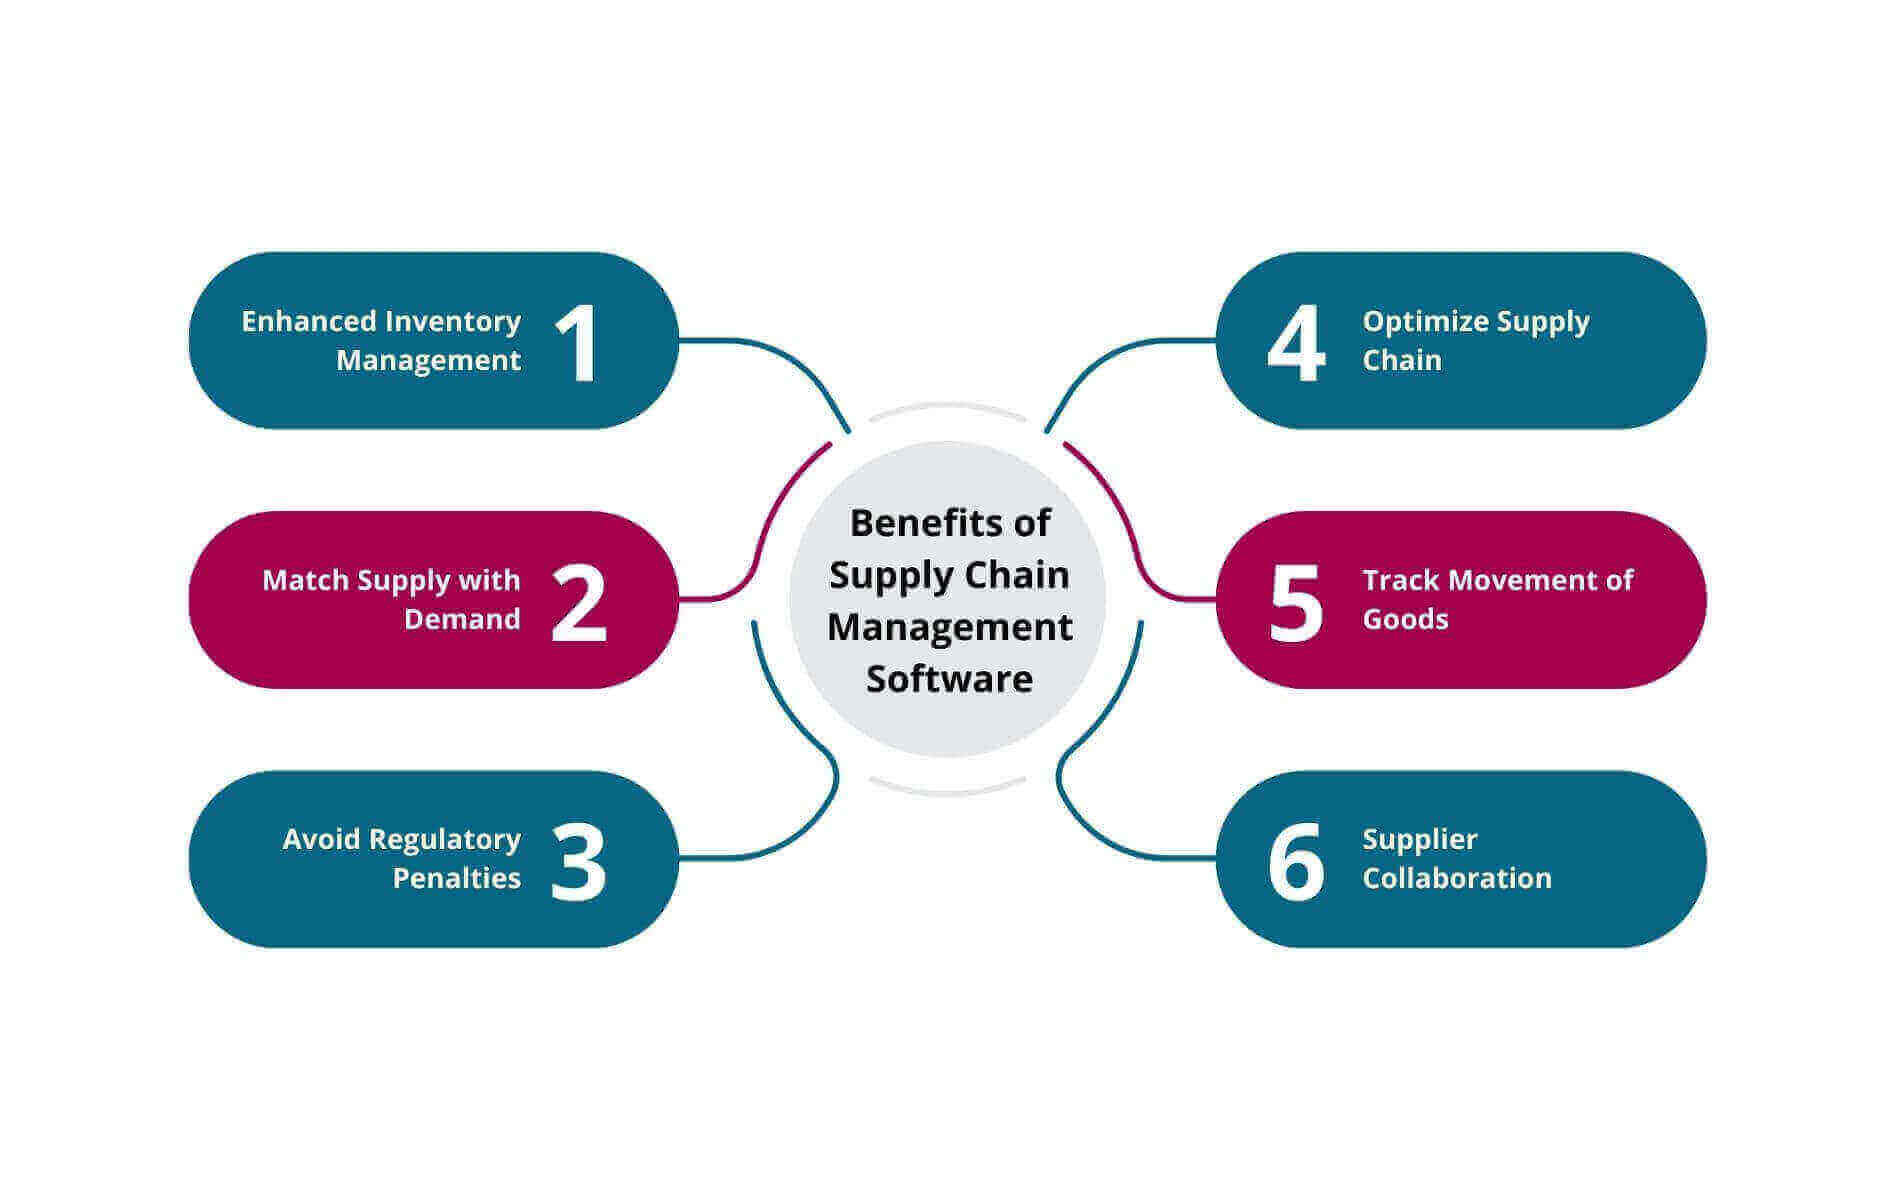 Benefits of Supply Chain Management Software